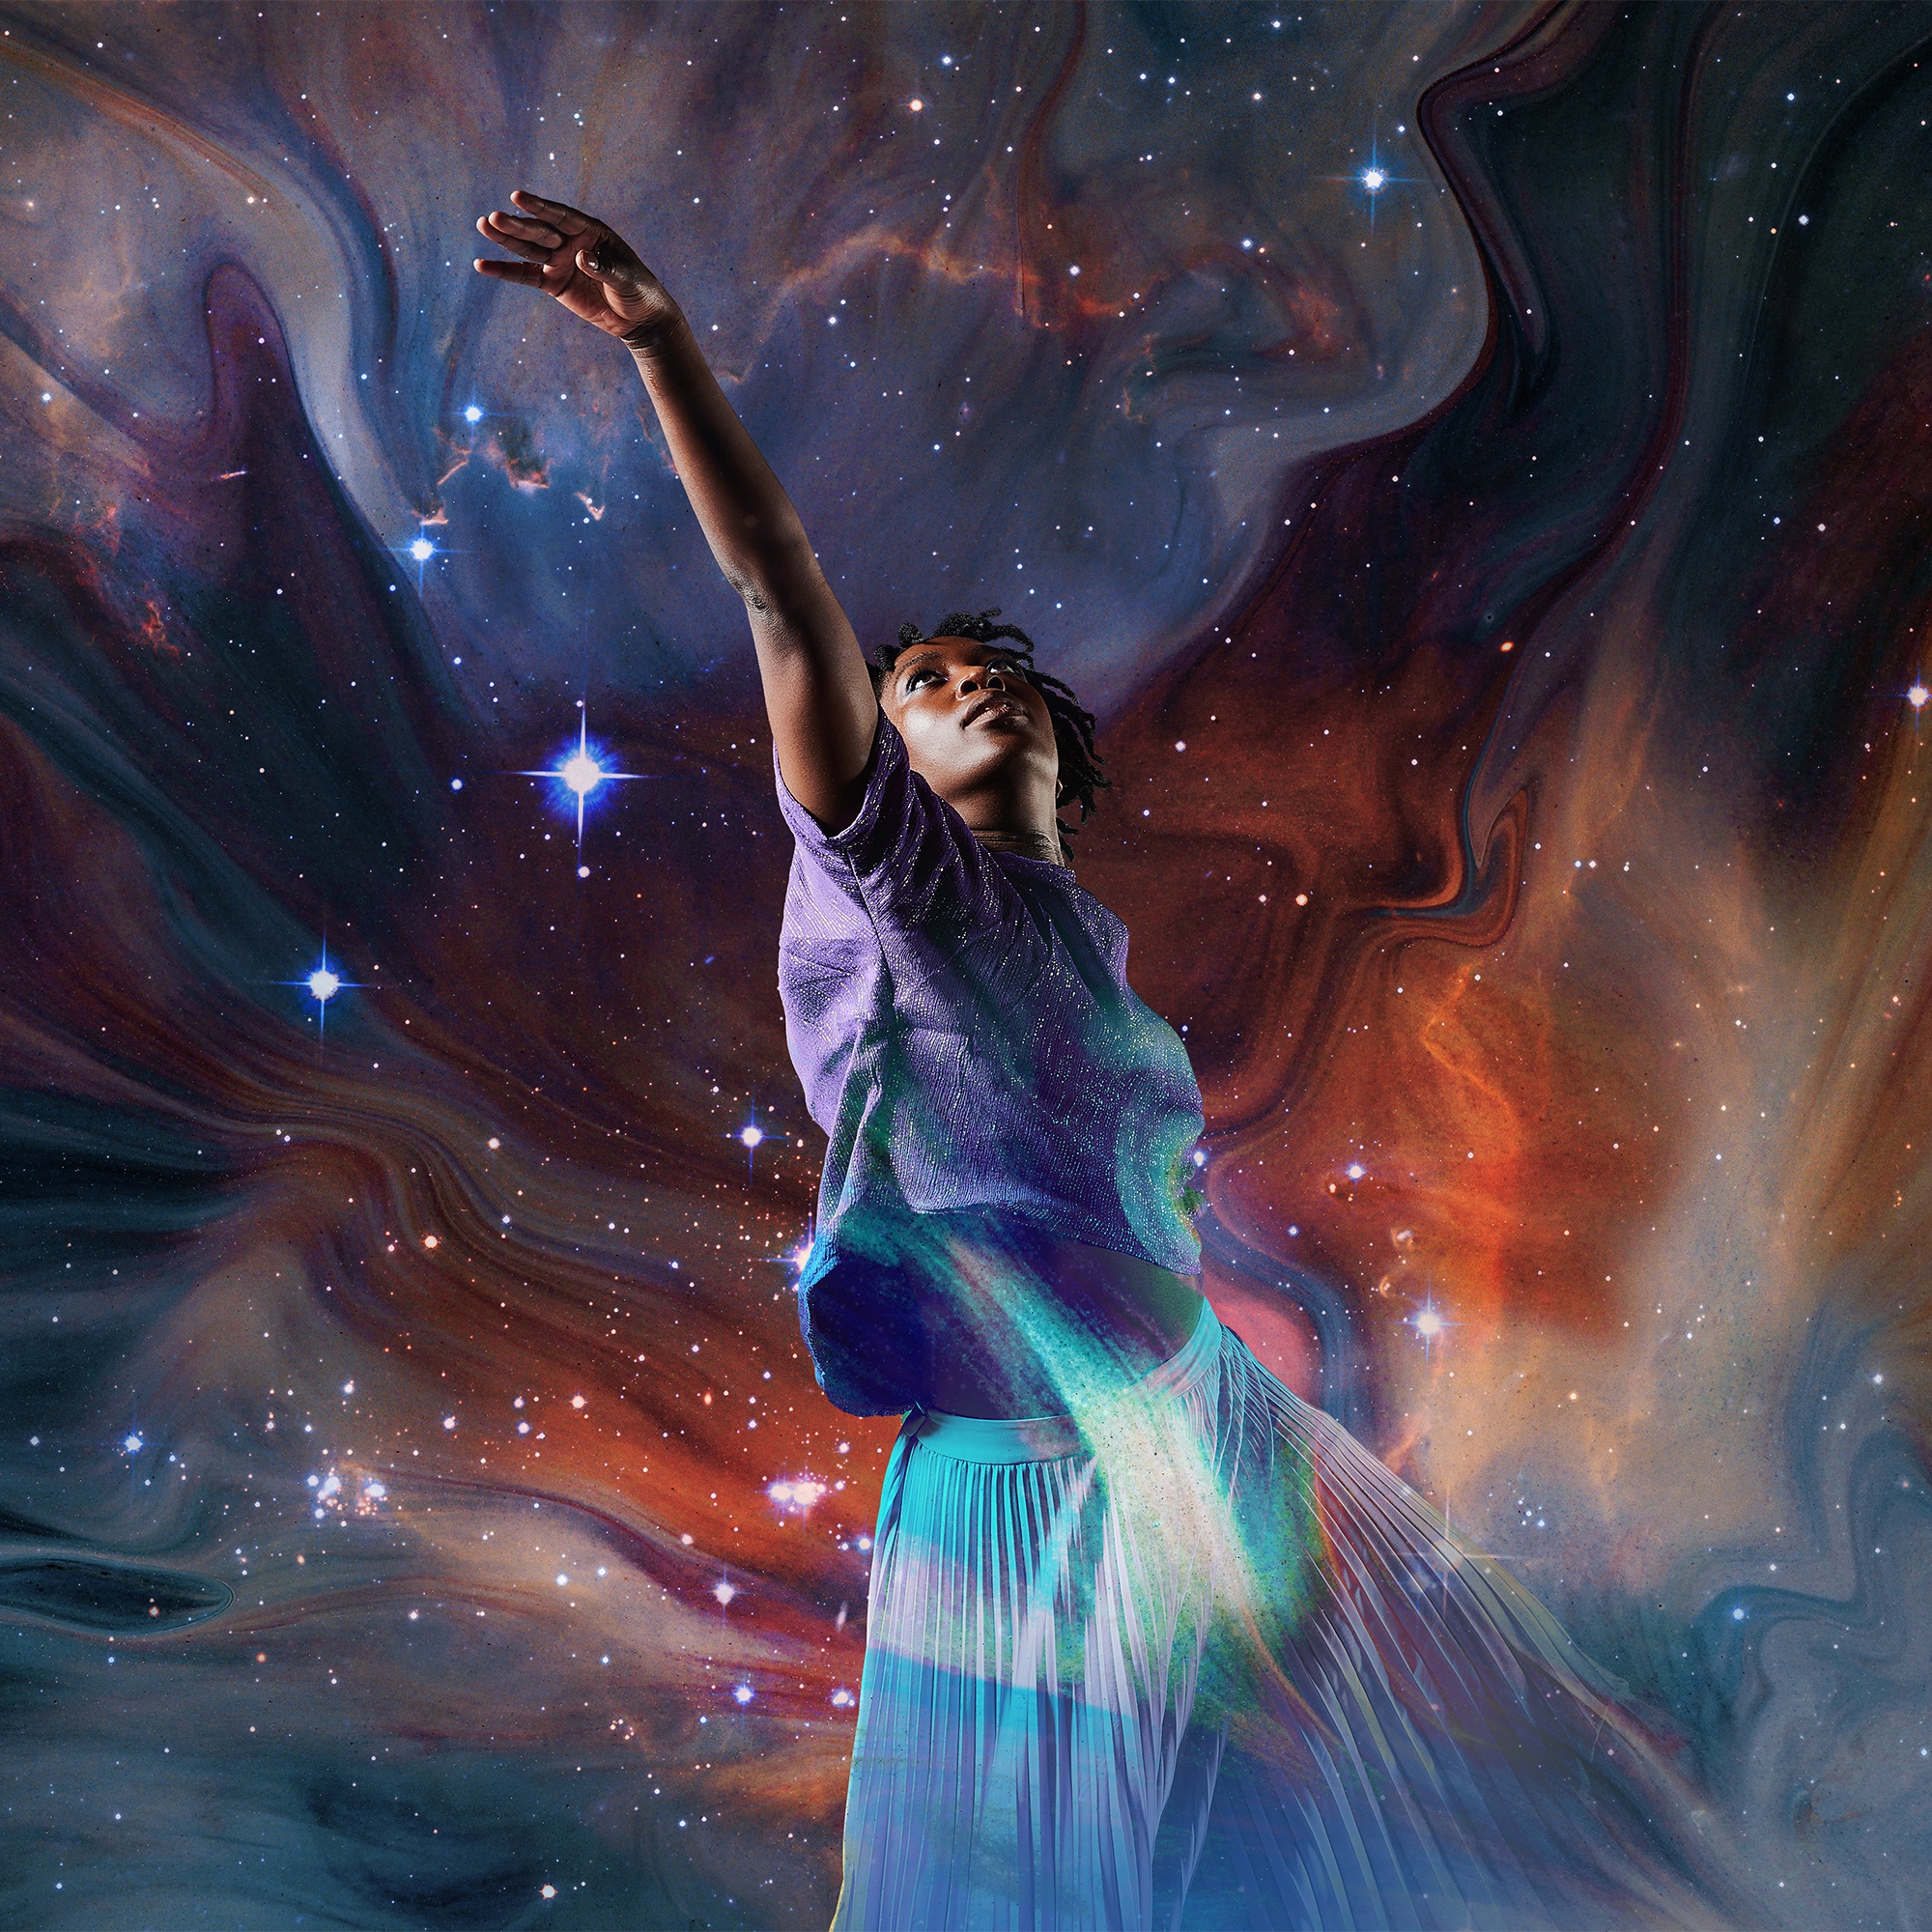 A black female dancer reaches into the stars as a swirling galaxy surrounds her